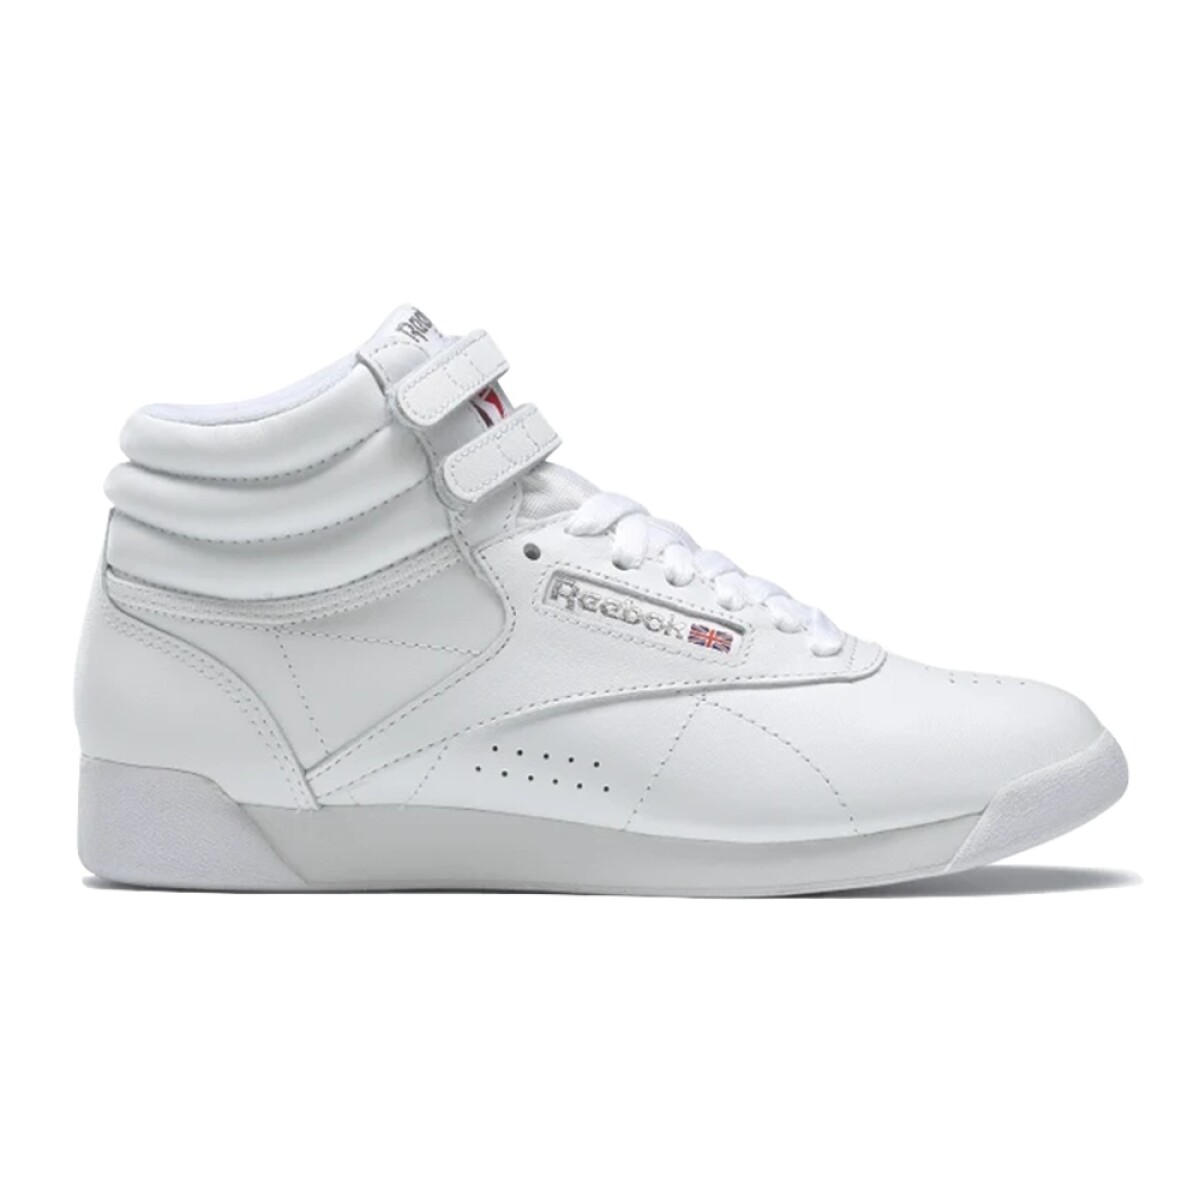 Championes Reebok Mujer Freestyle High Classic 2431 Casual - Blanco 